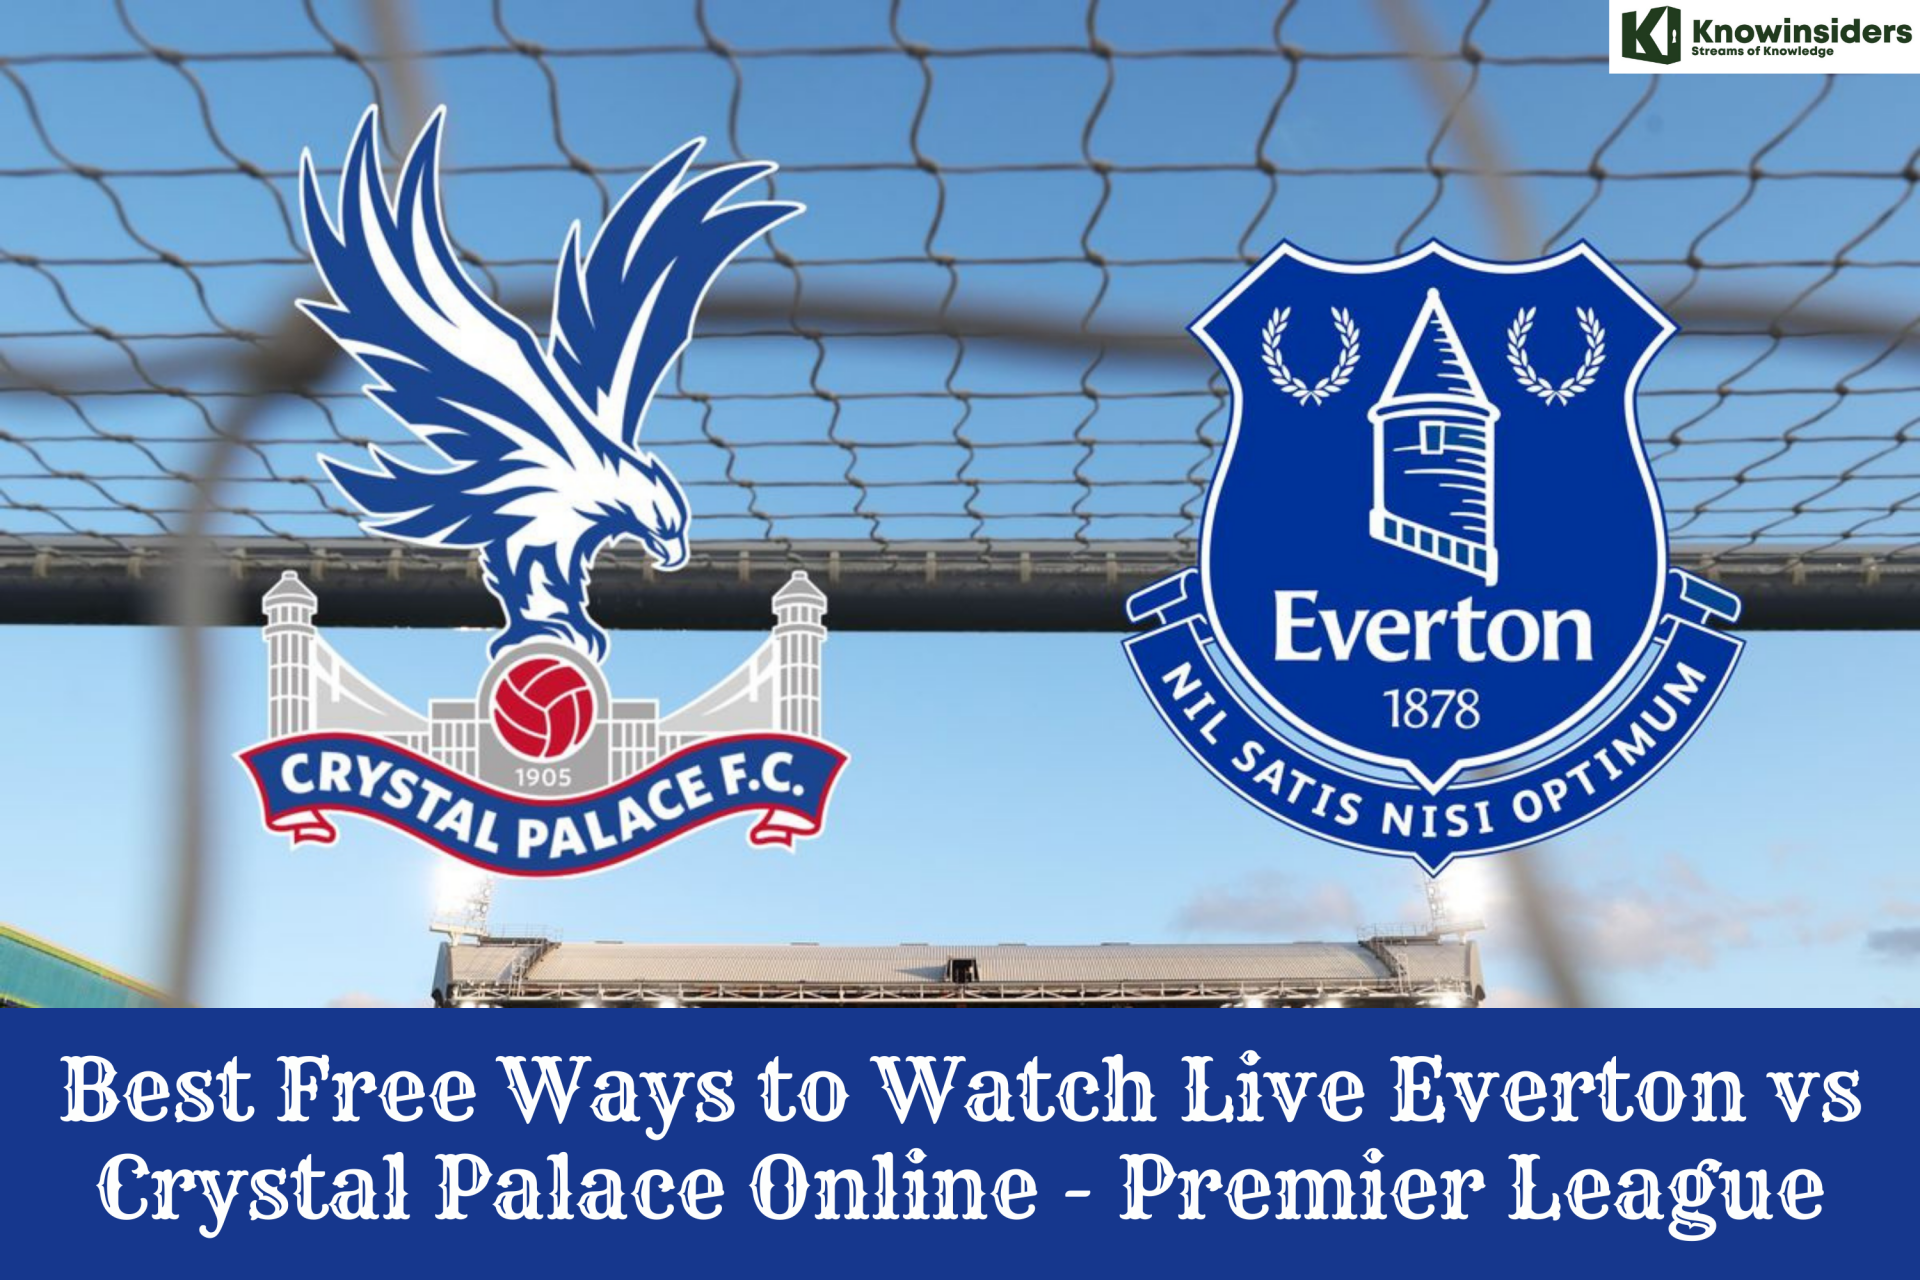 Best Free Sites to Watch Everton vs Crystal Palace Online - Premier League